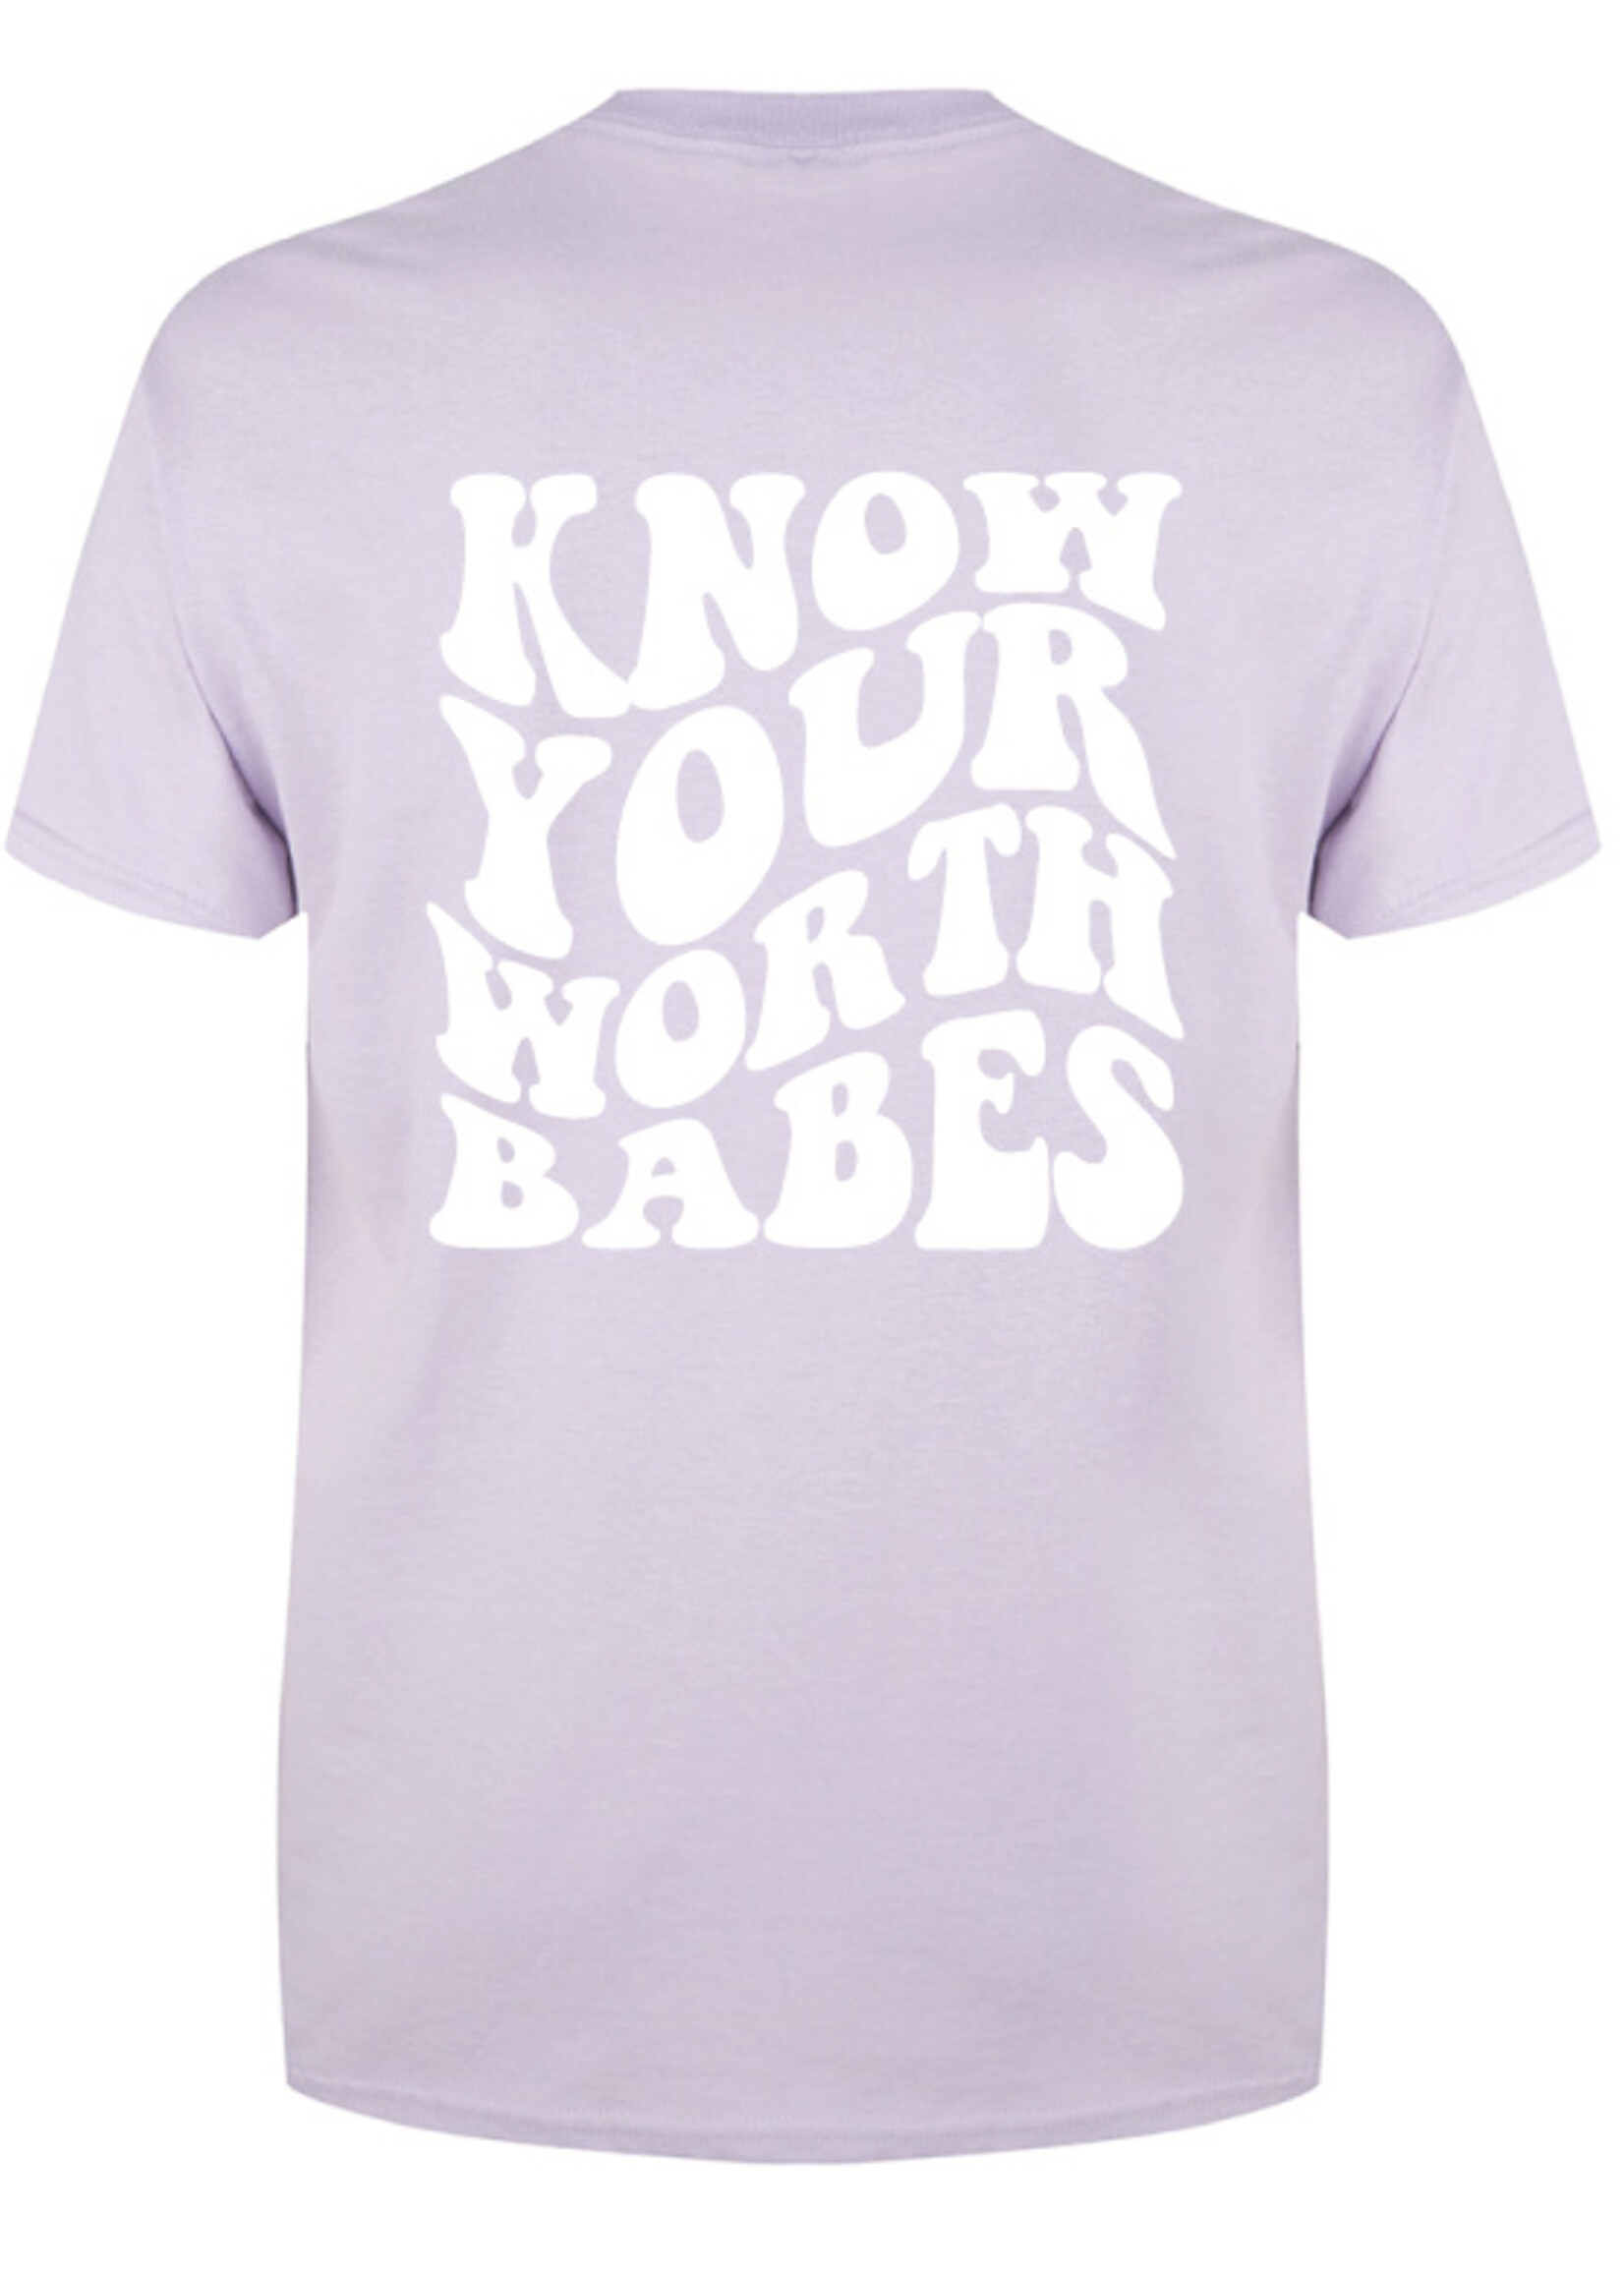 KNOW YOUR WORTH TEE SOFT LILAC